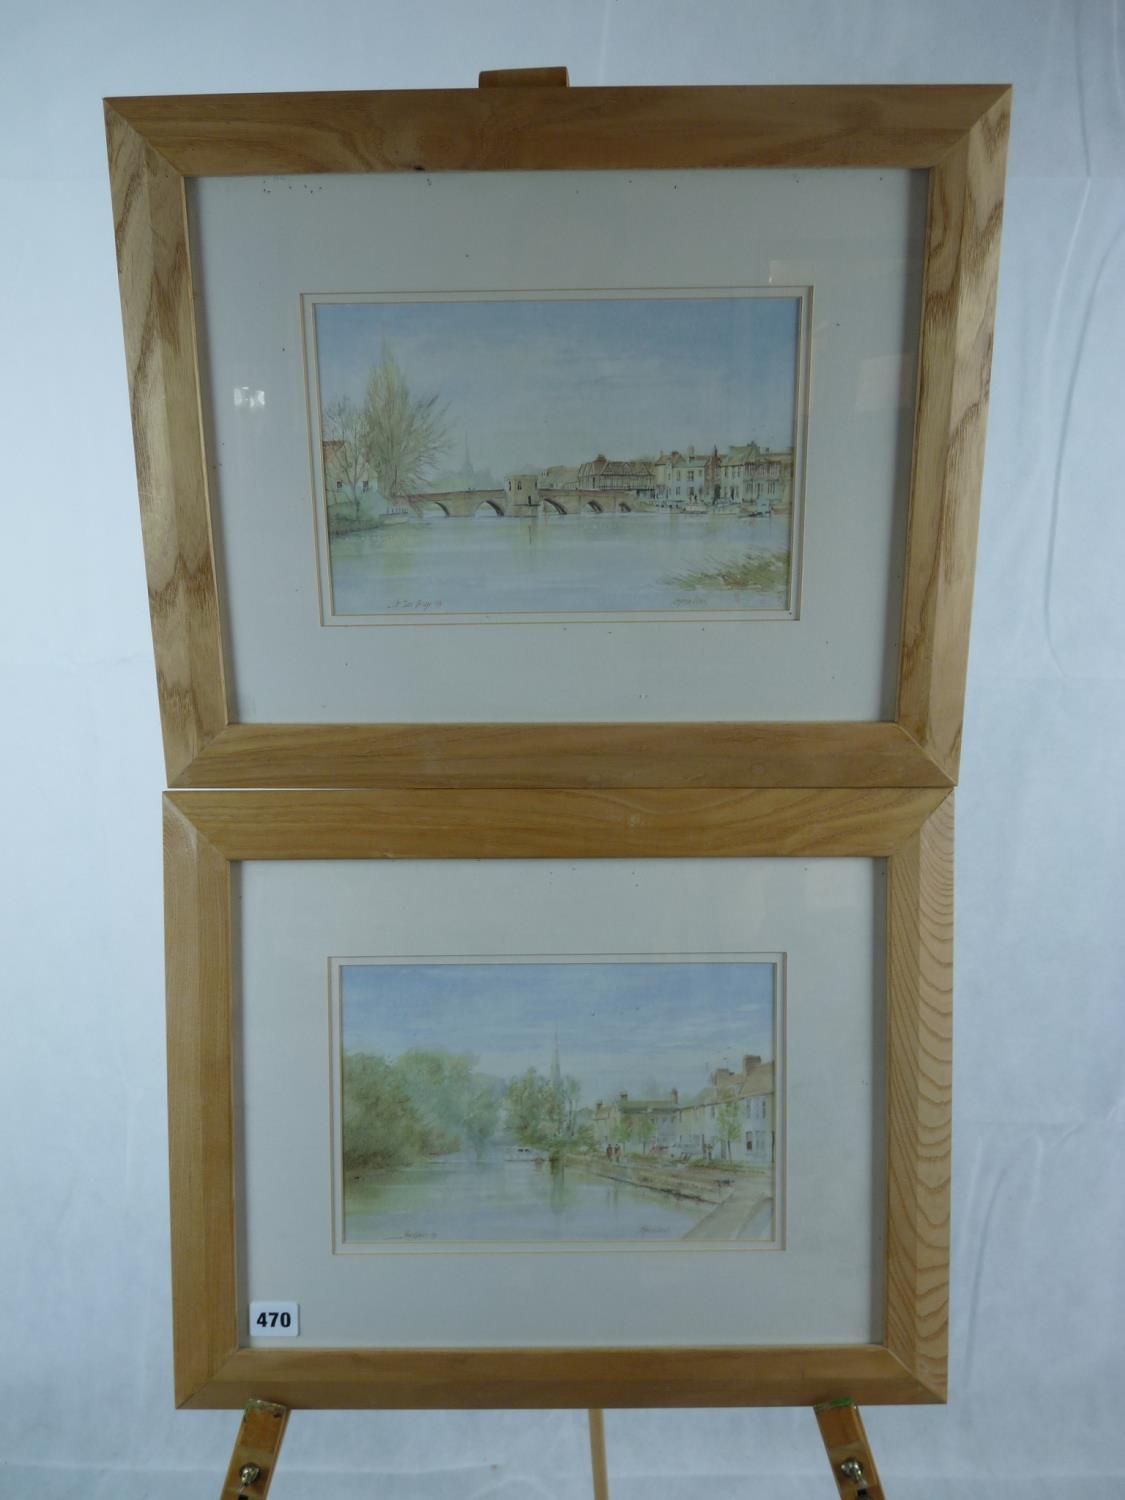 Framed Watercolour of St Ives Bridge and a Watercolour of The Waits, St Ives by Stephen Lewis